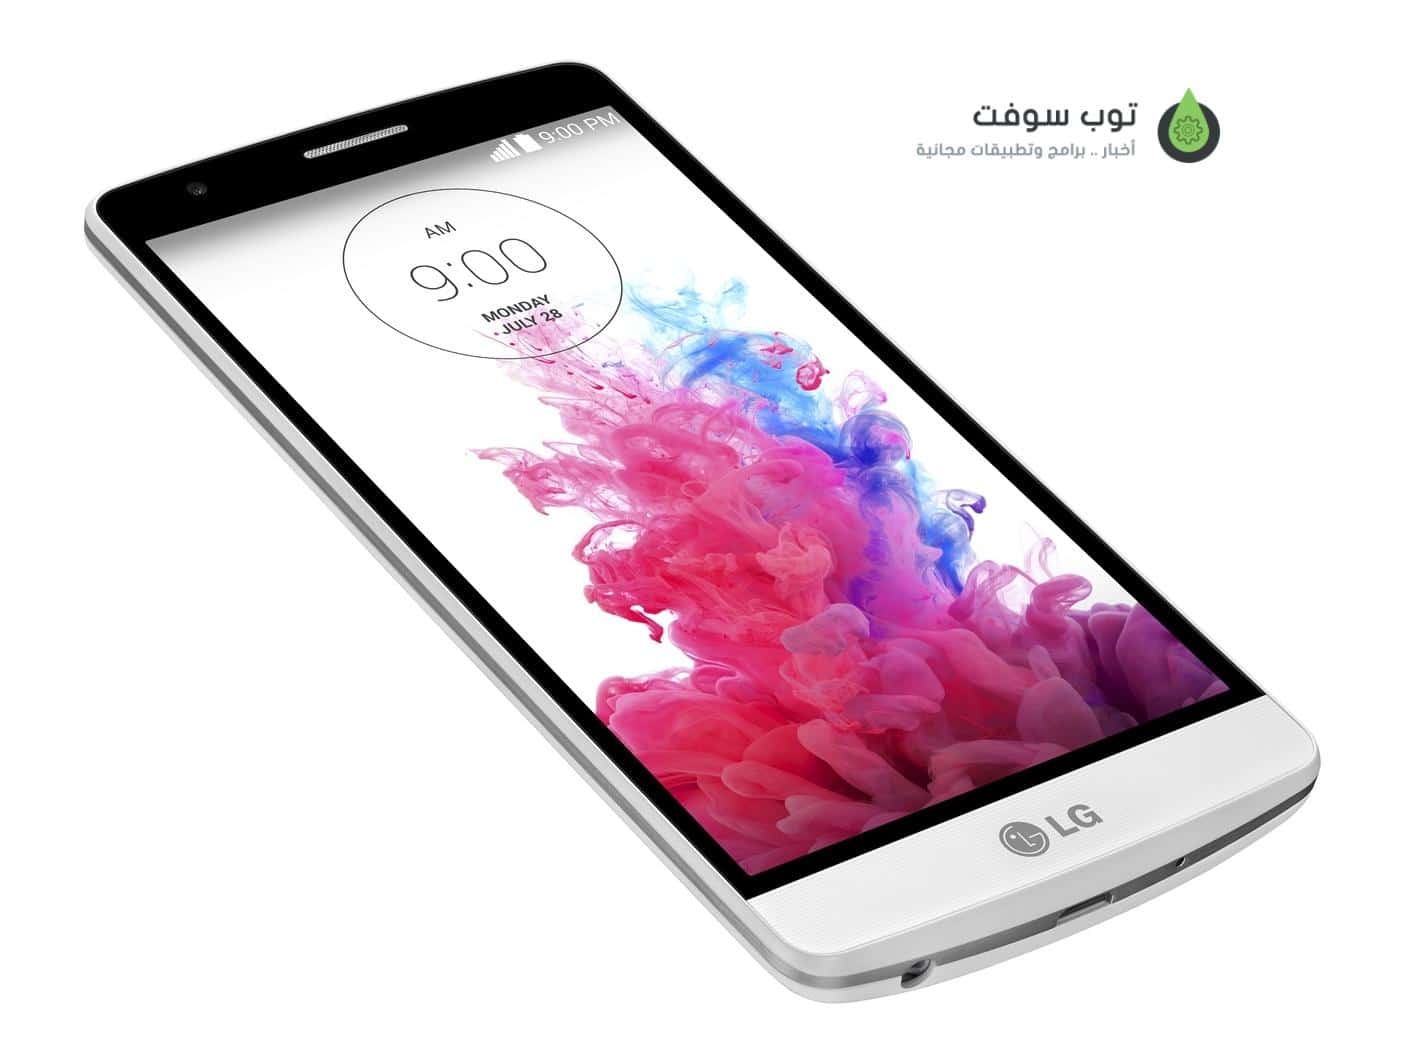 LG-G3-Beat-G3-s-official-images